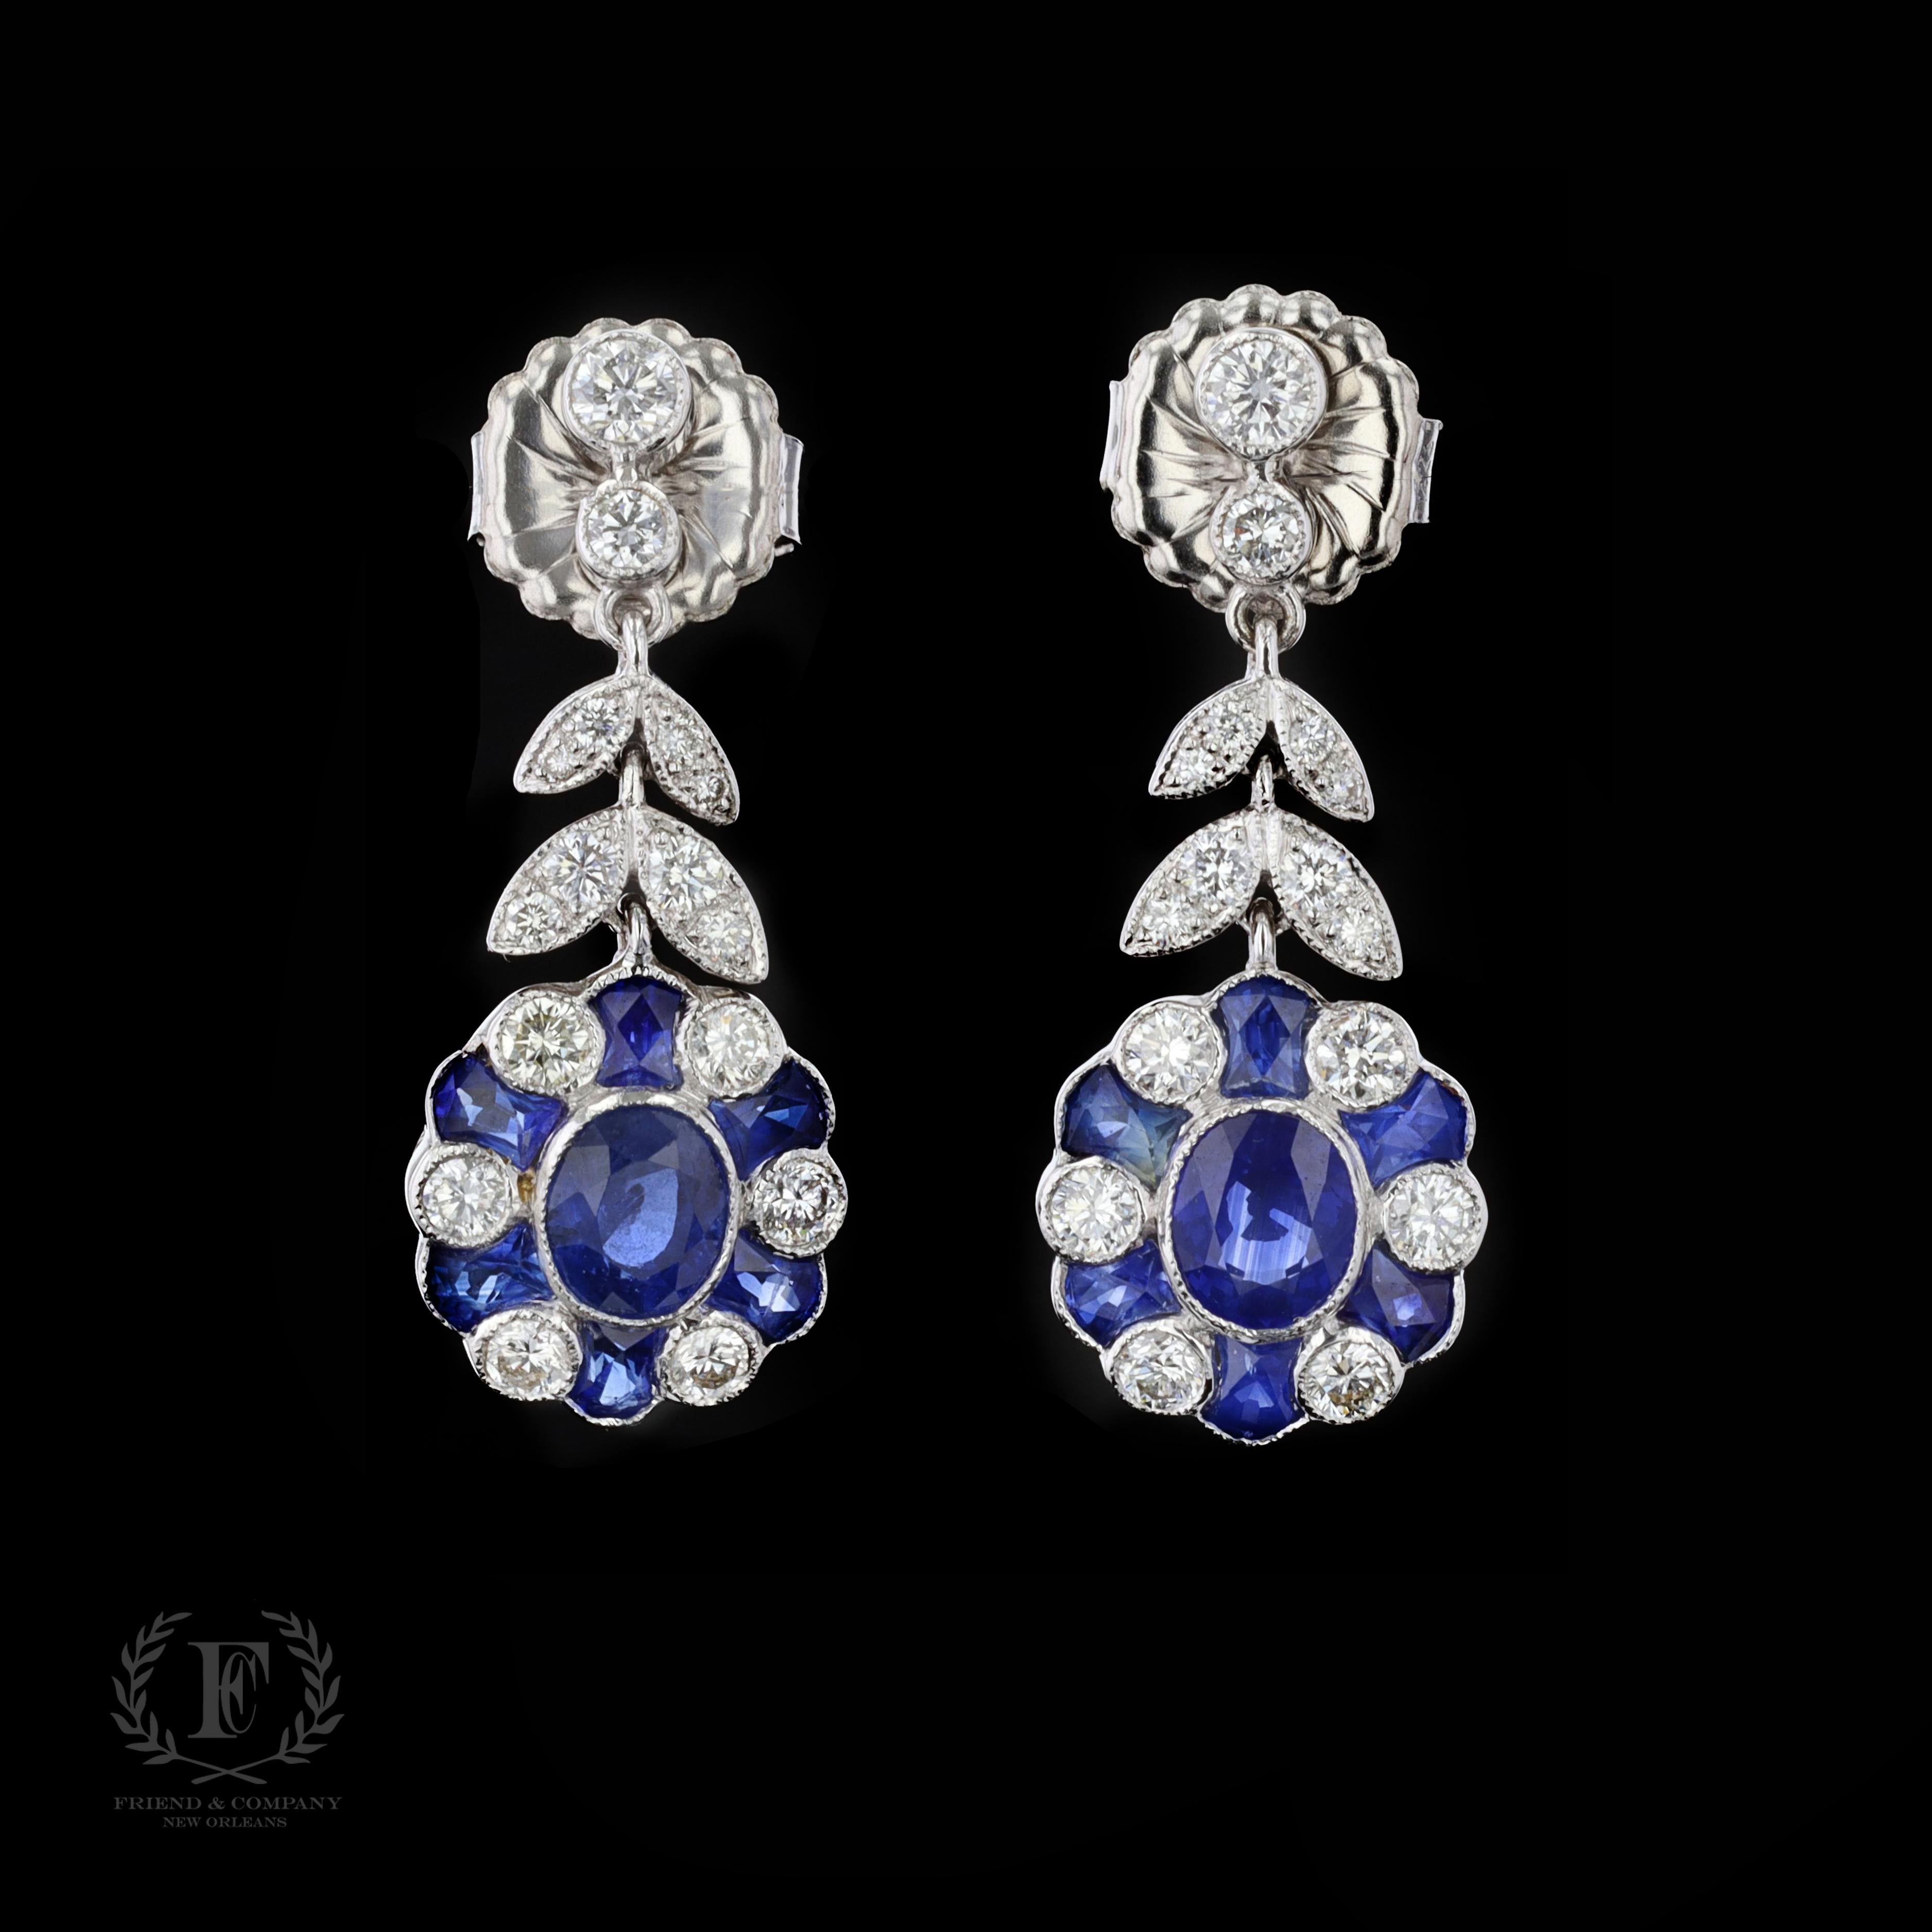 The earrings feature oval and modified faceted blue sapphires that weigh approximately 5.00 carats. The sapphires are accentuated by sparkling round cut diamonds that weigh approximately 1.60 carats. The color of the diamonds is H with VS clarity.